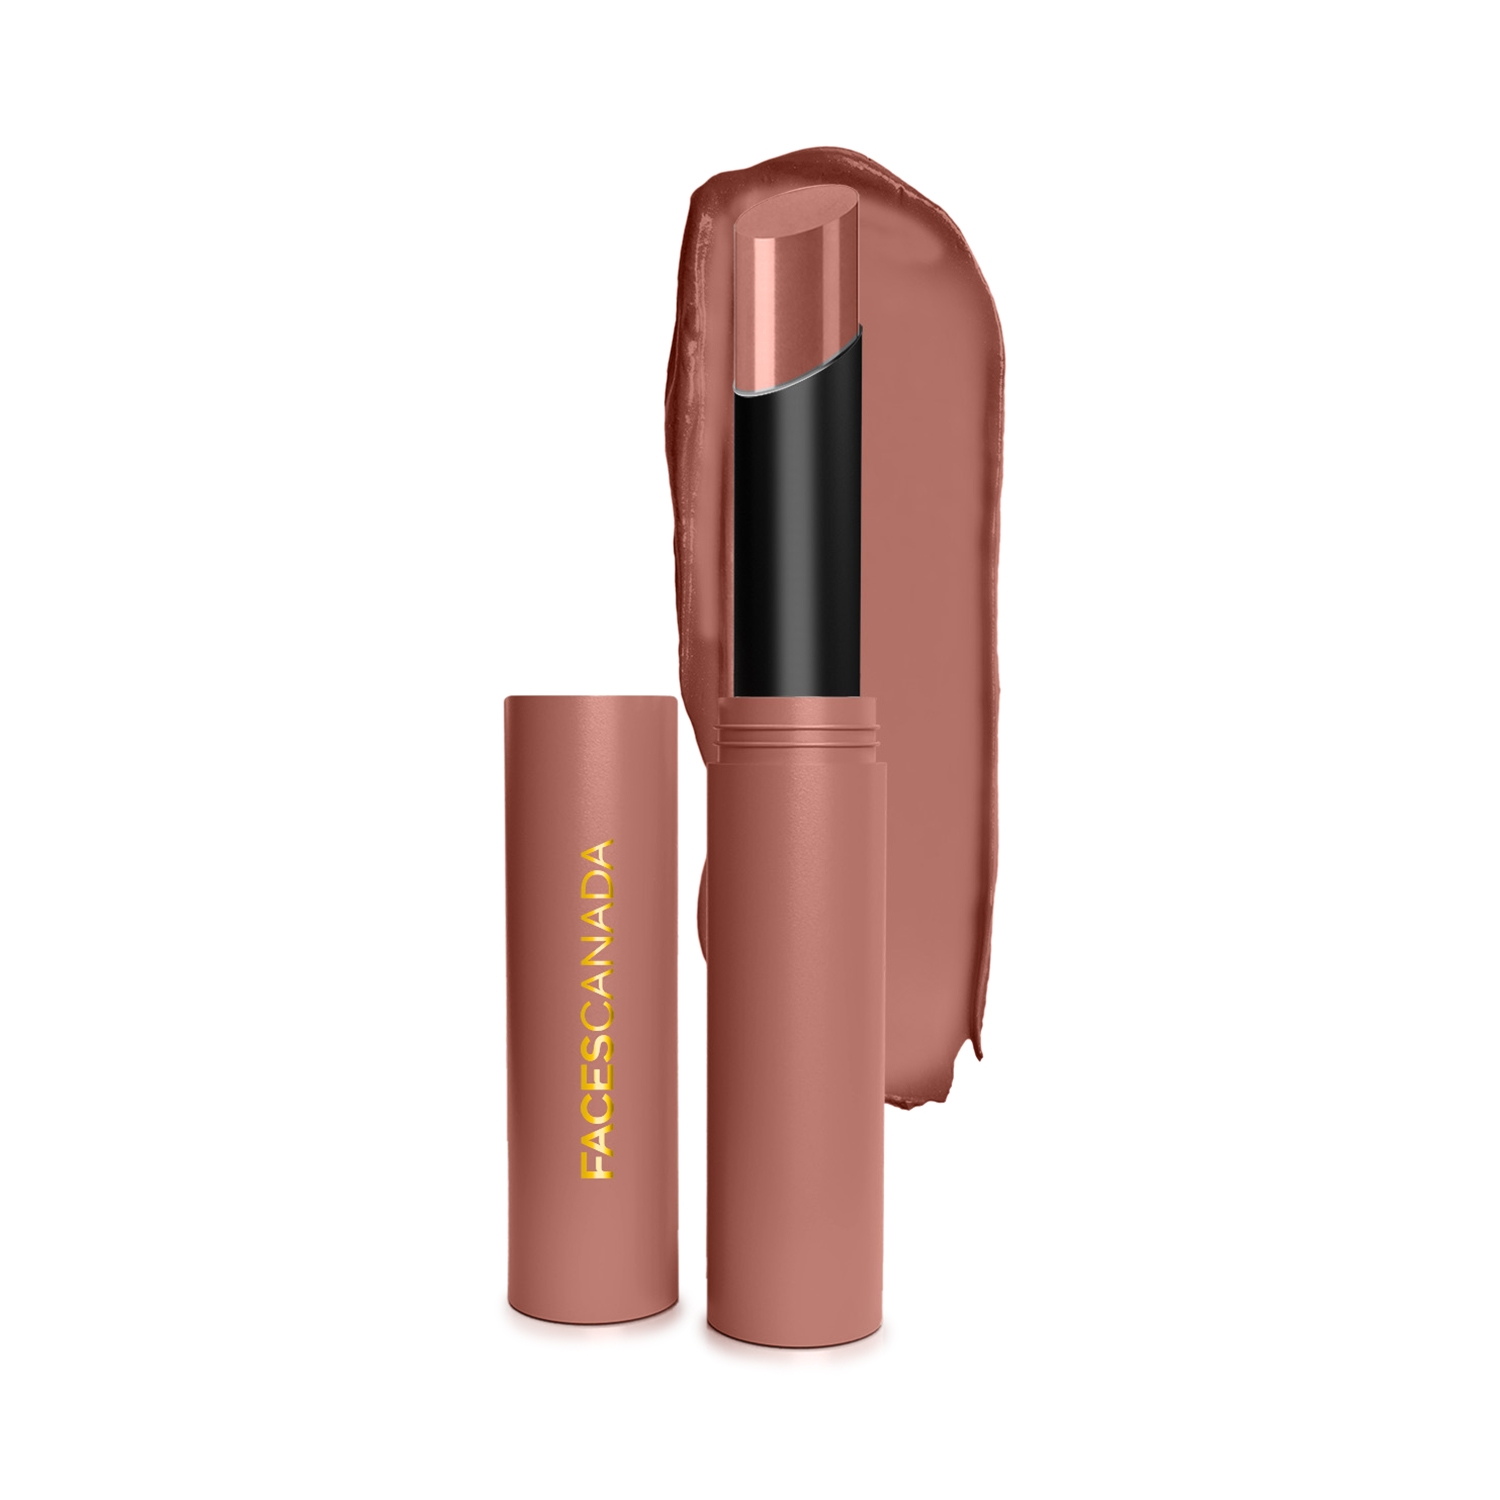 Faces Canada | Faces Canada 3-In-1 Long Stay Matte Lipstick - 07 Camouflage Mauve (2g)